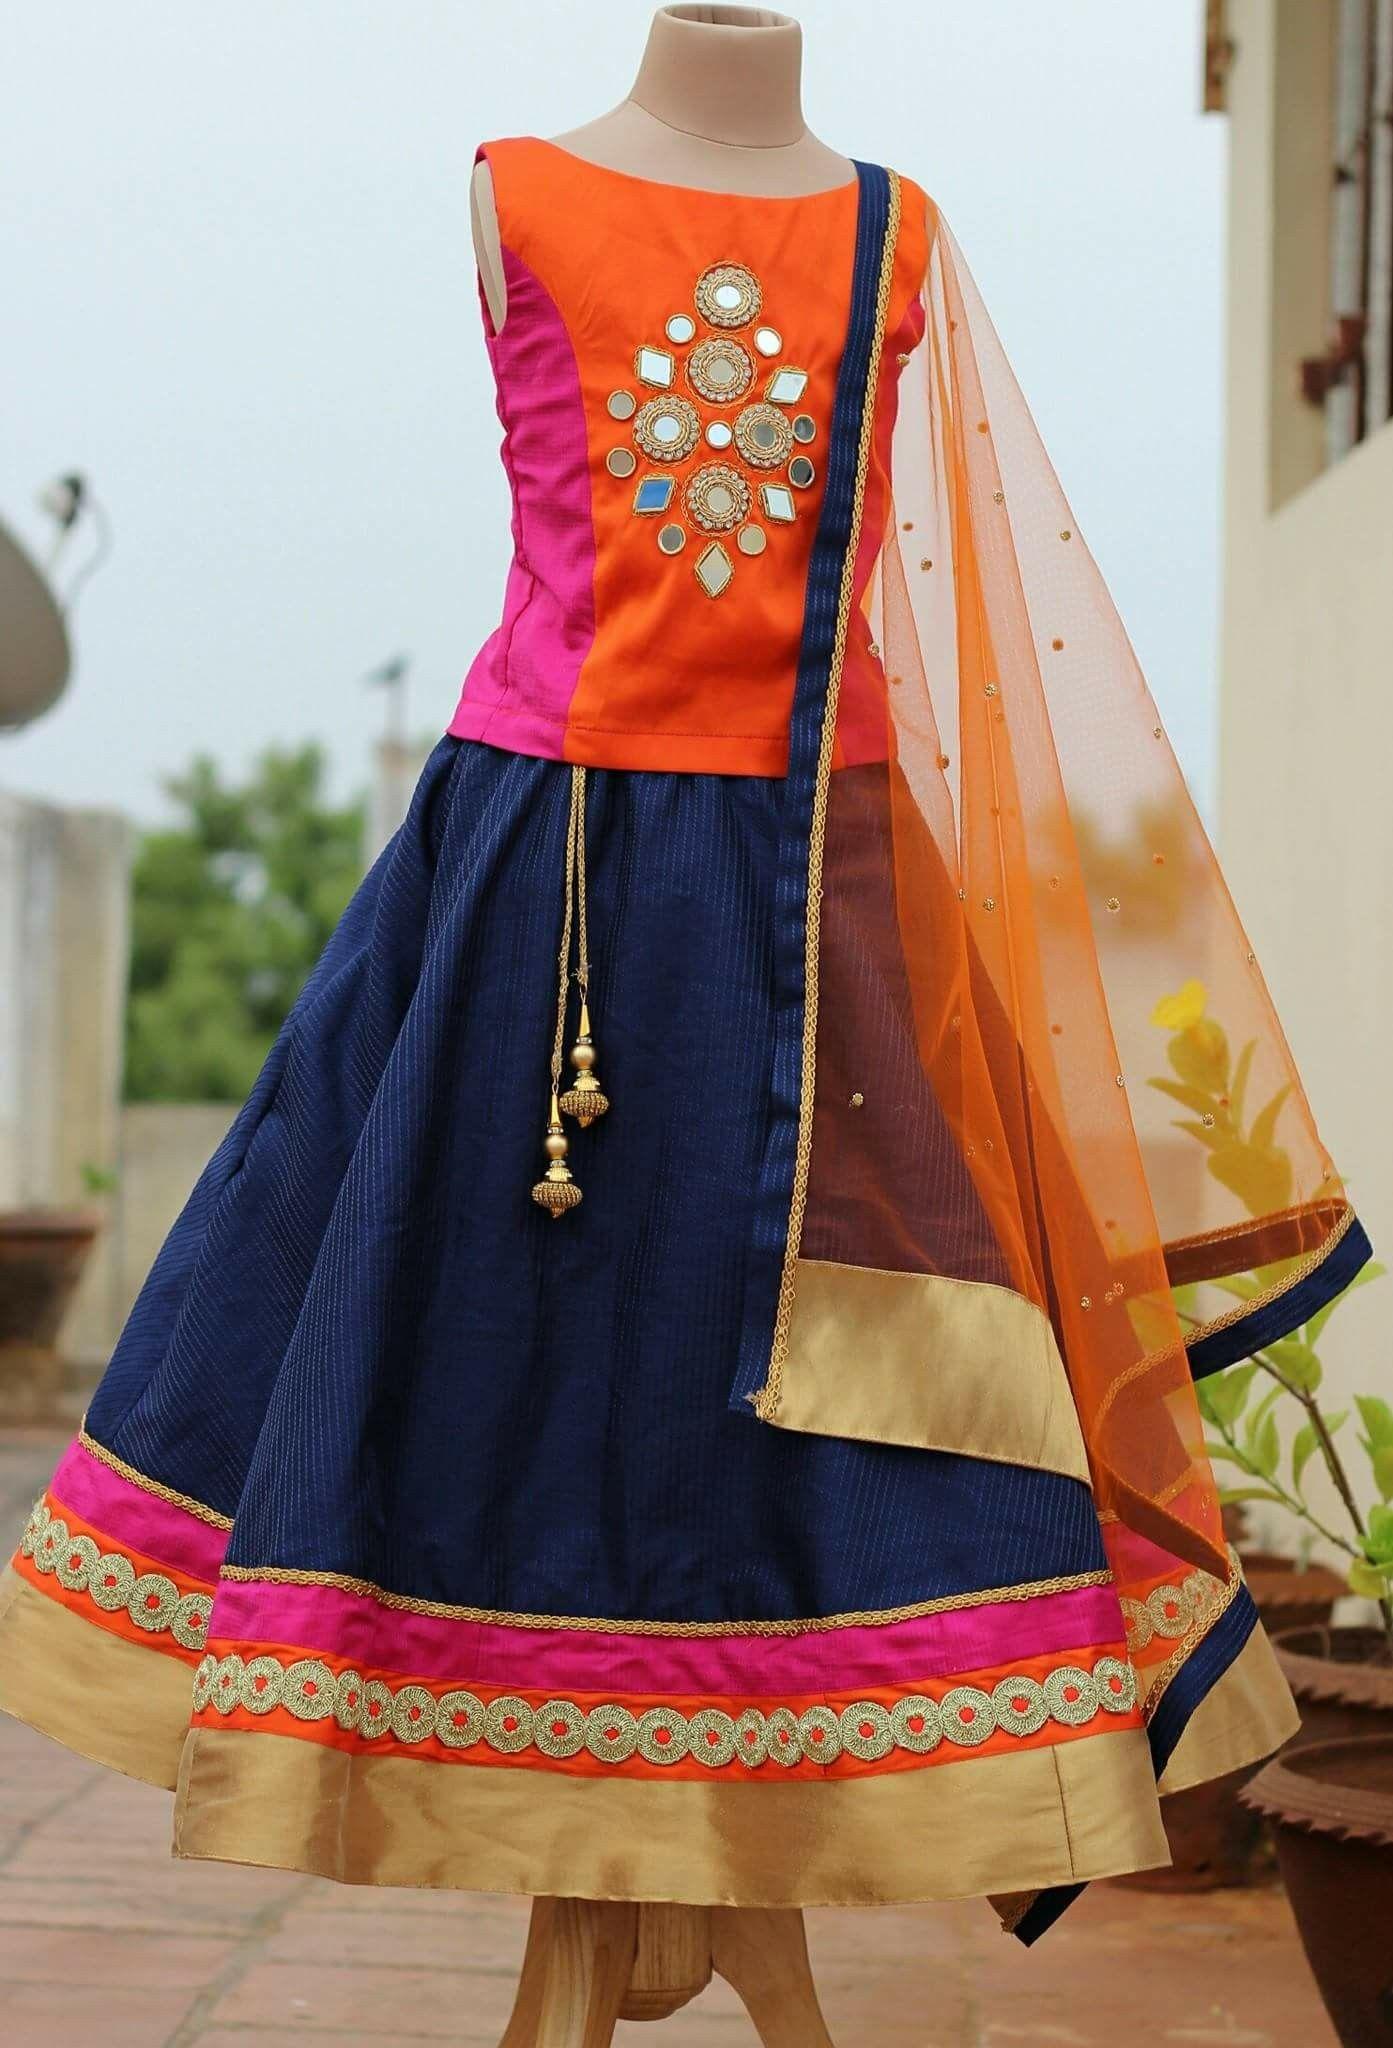 Orange and Blue Indian Logo - Can try a frock with orange satin and dark blue tulle | kids dress ...